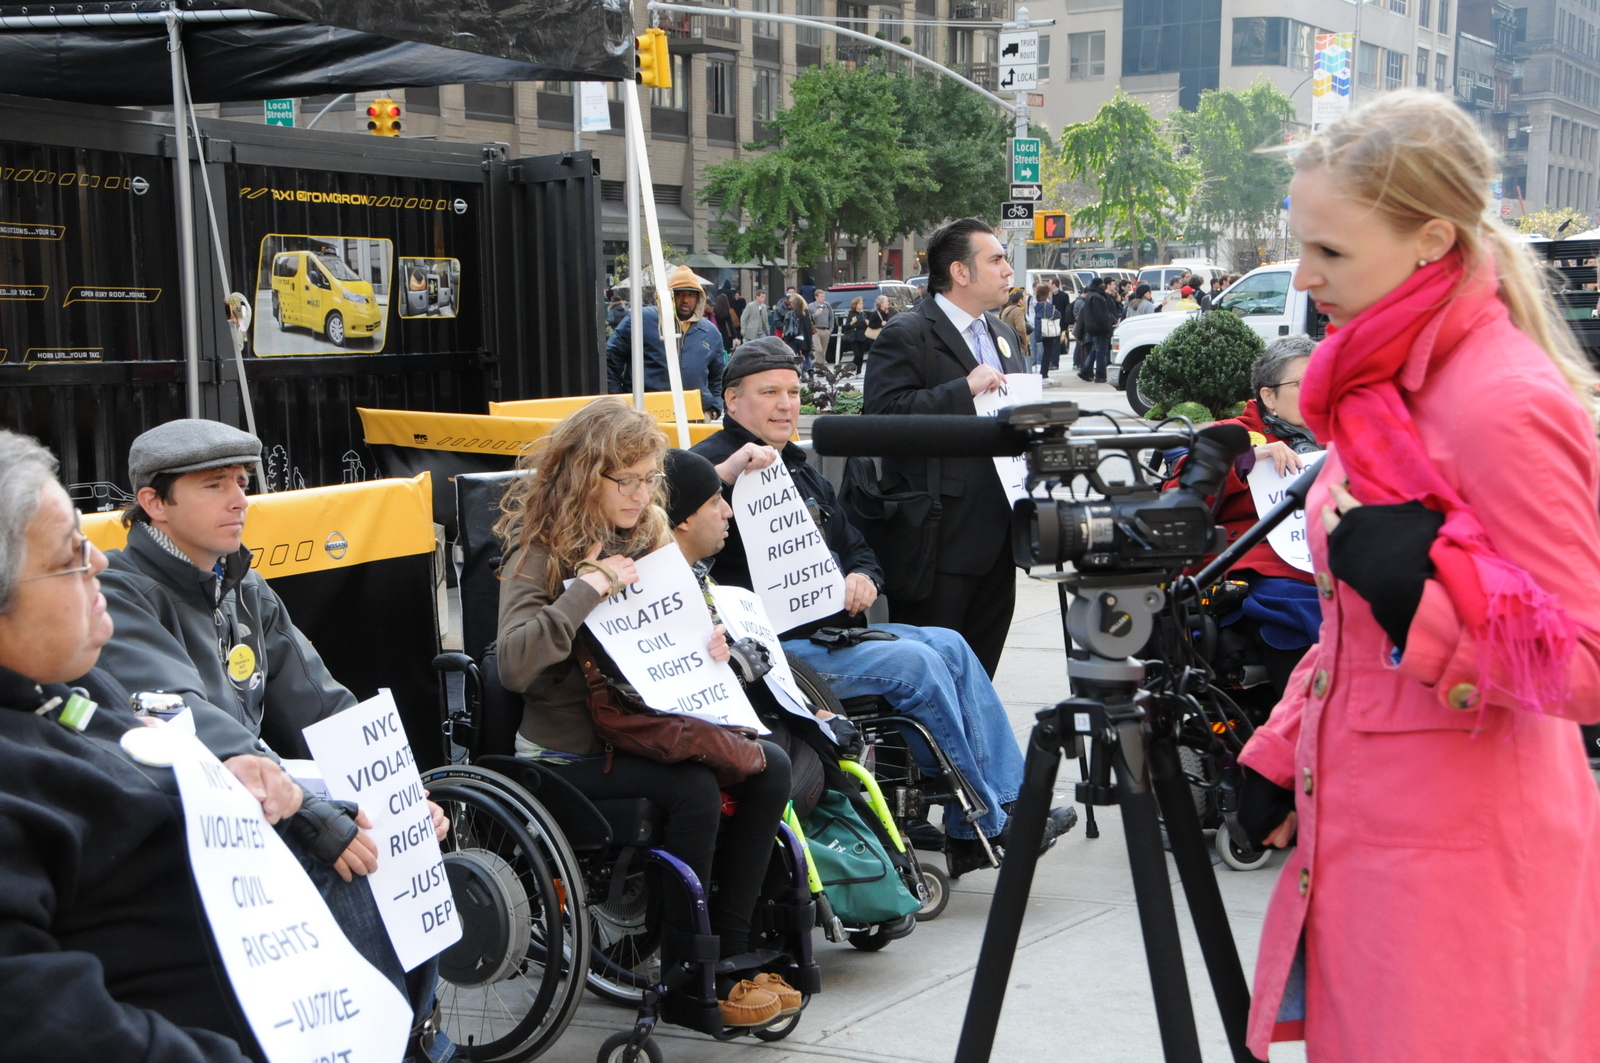 photo of a news camera filming, or ready to film, protestors in wheelchairs